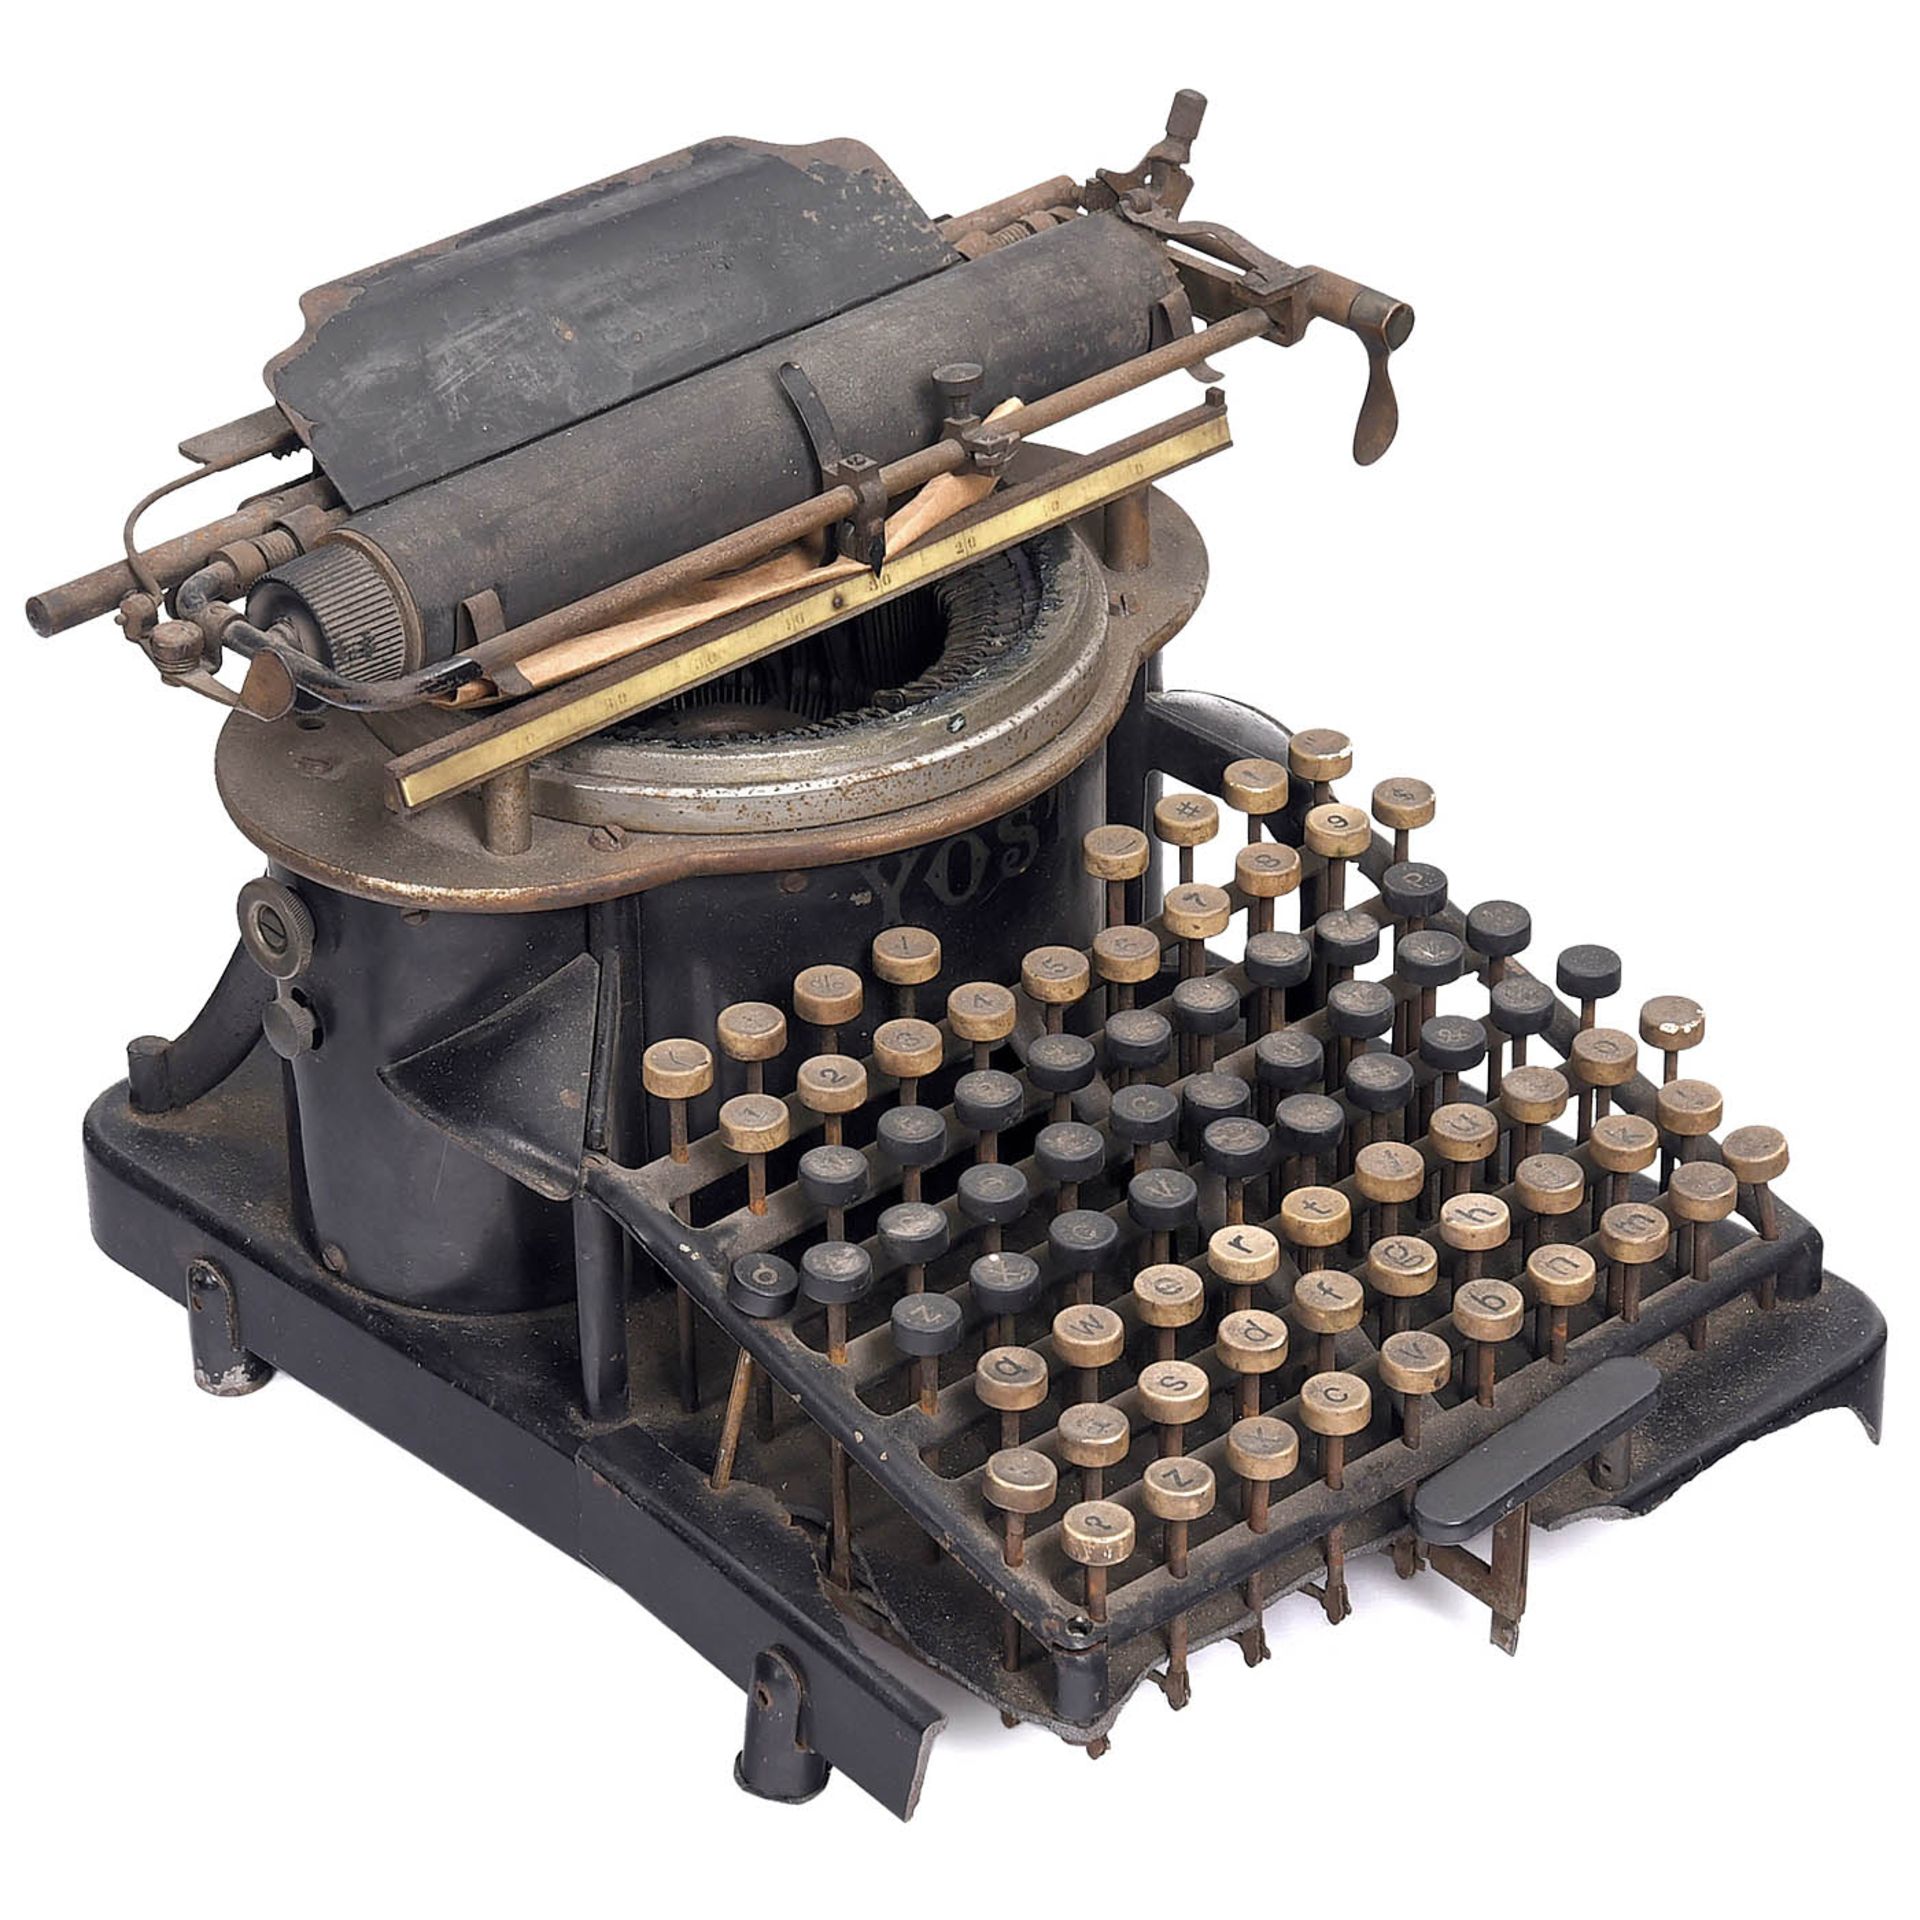 4 Typewriters for Restoration or for Spare Parts - Image 2 of 5